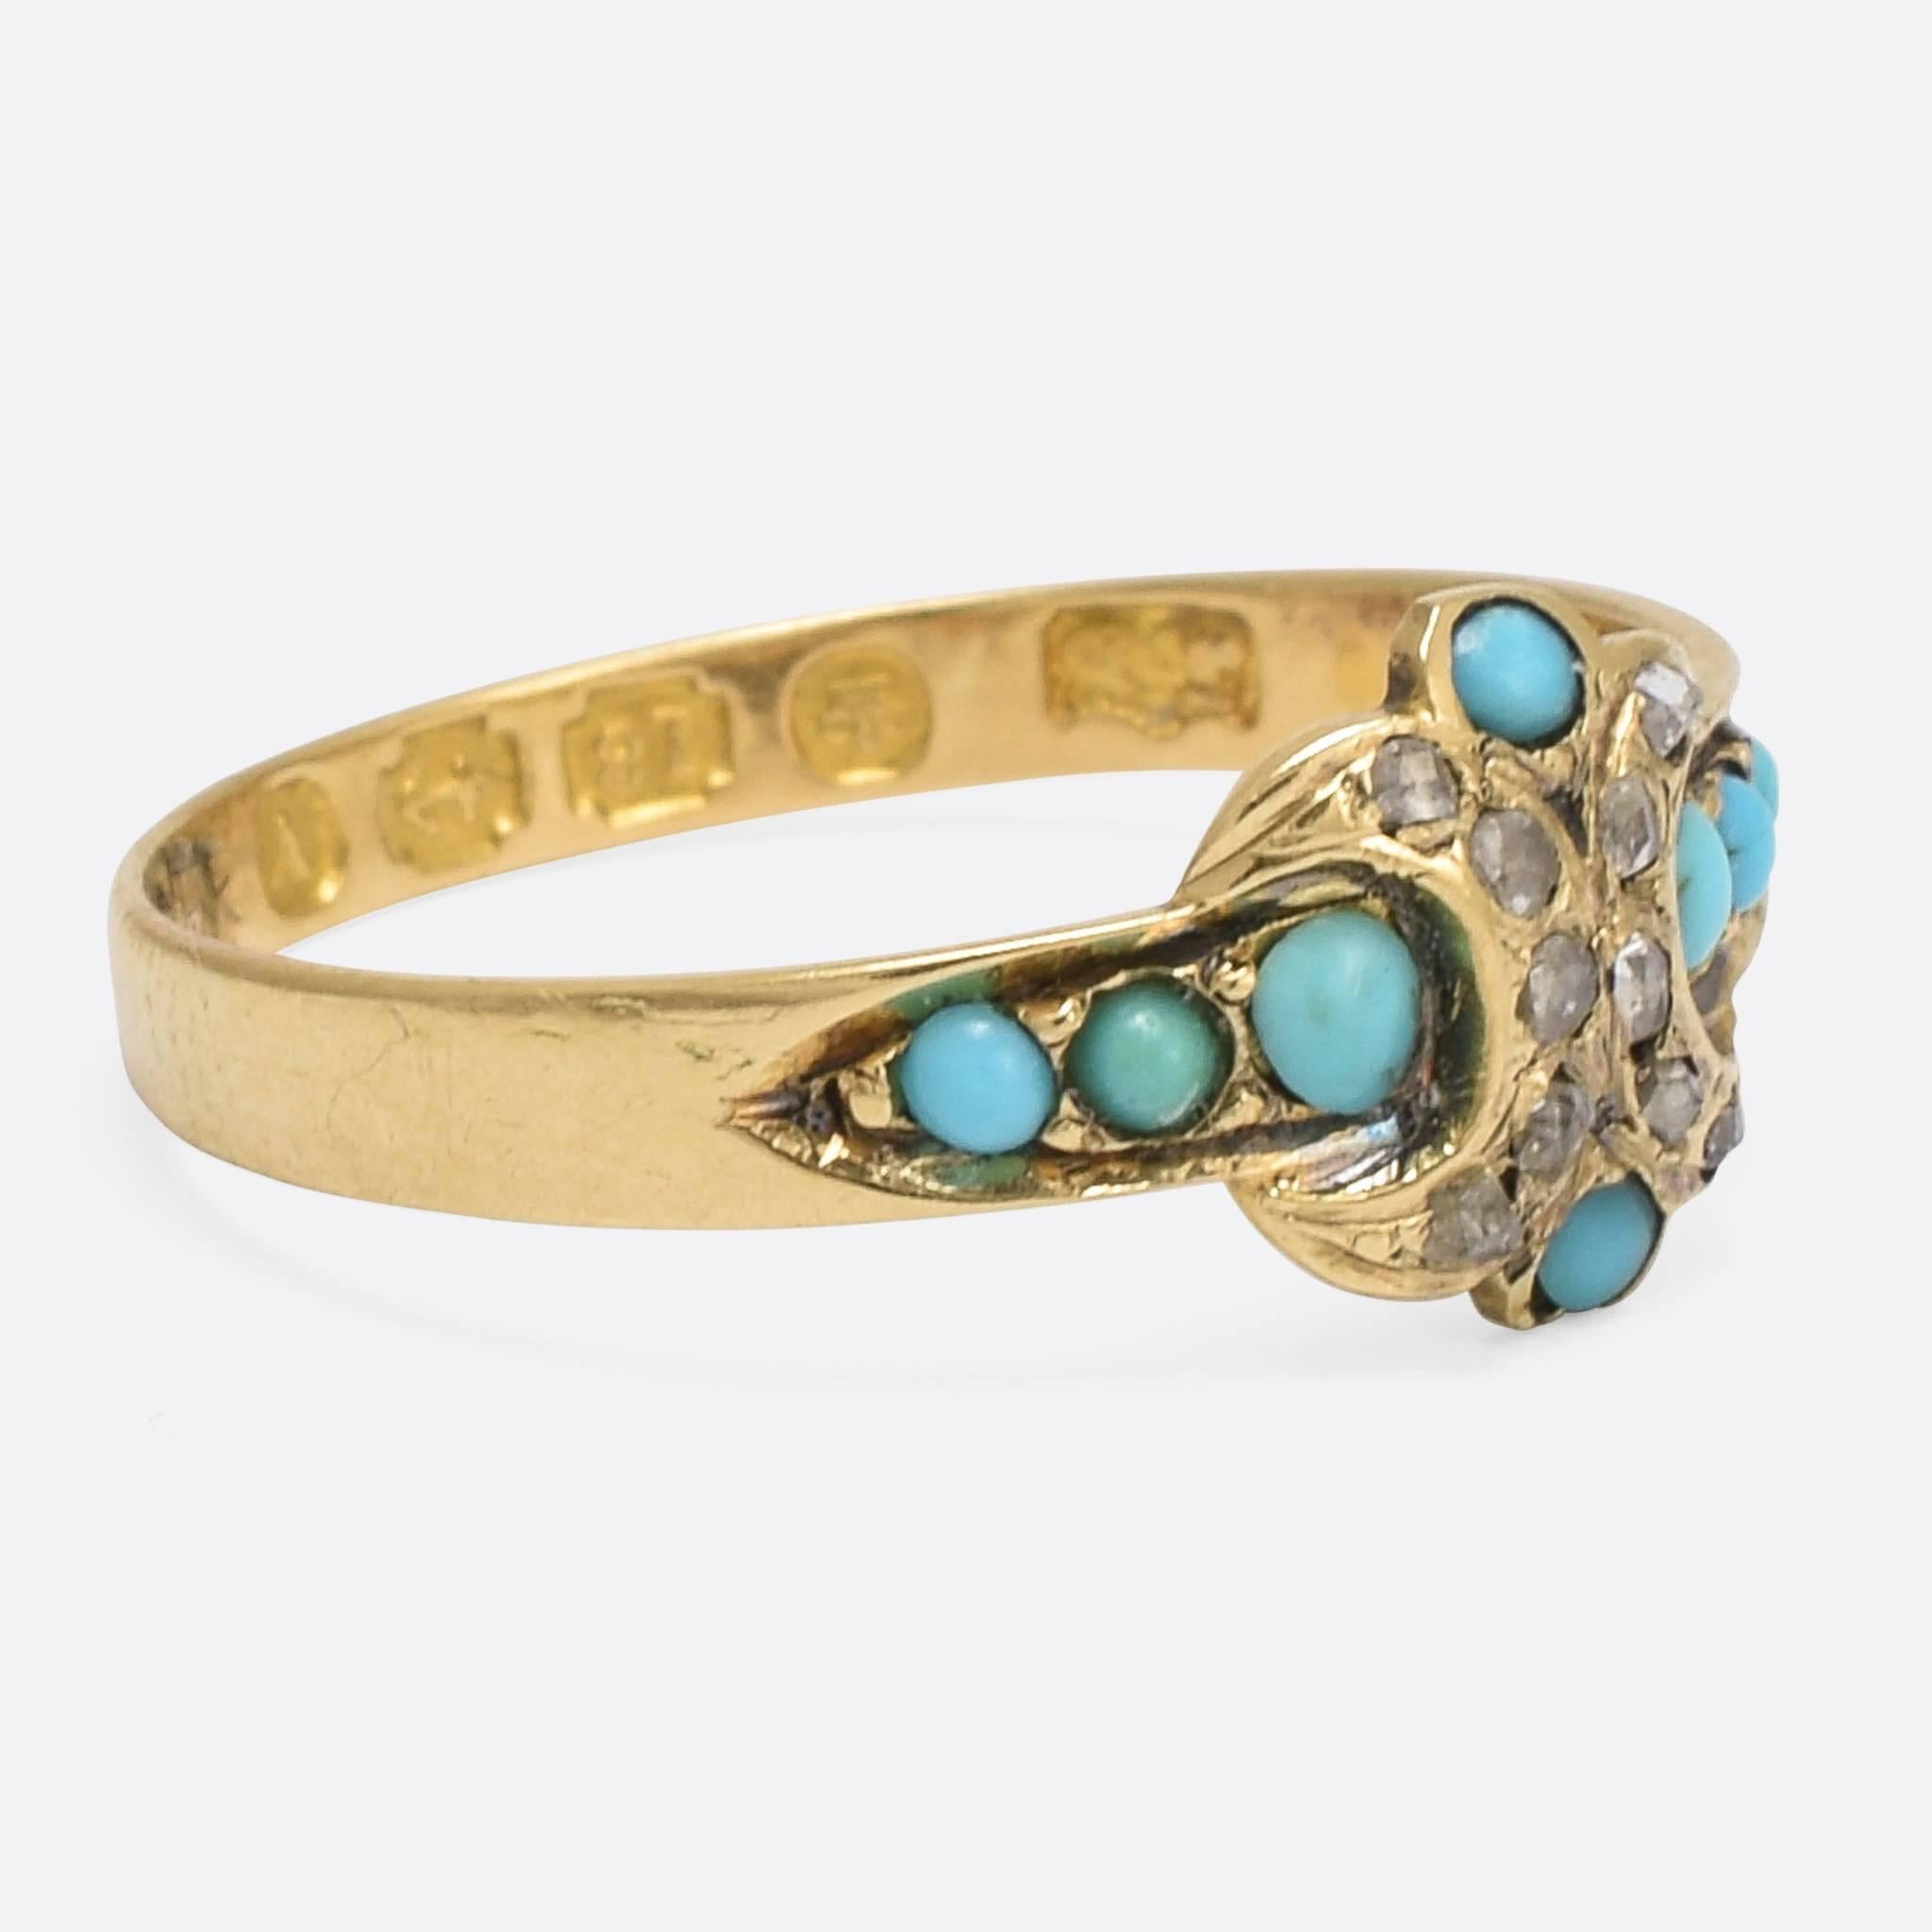 A stylish antique turquoise and diamond ring that won't break the bank. It's modelled in 18k gold, and fully hallmarked from the Birmingham assay office - dated 1870. Graduated turquoise cabochons draw the eye to the X-shaped head, which is set with